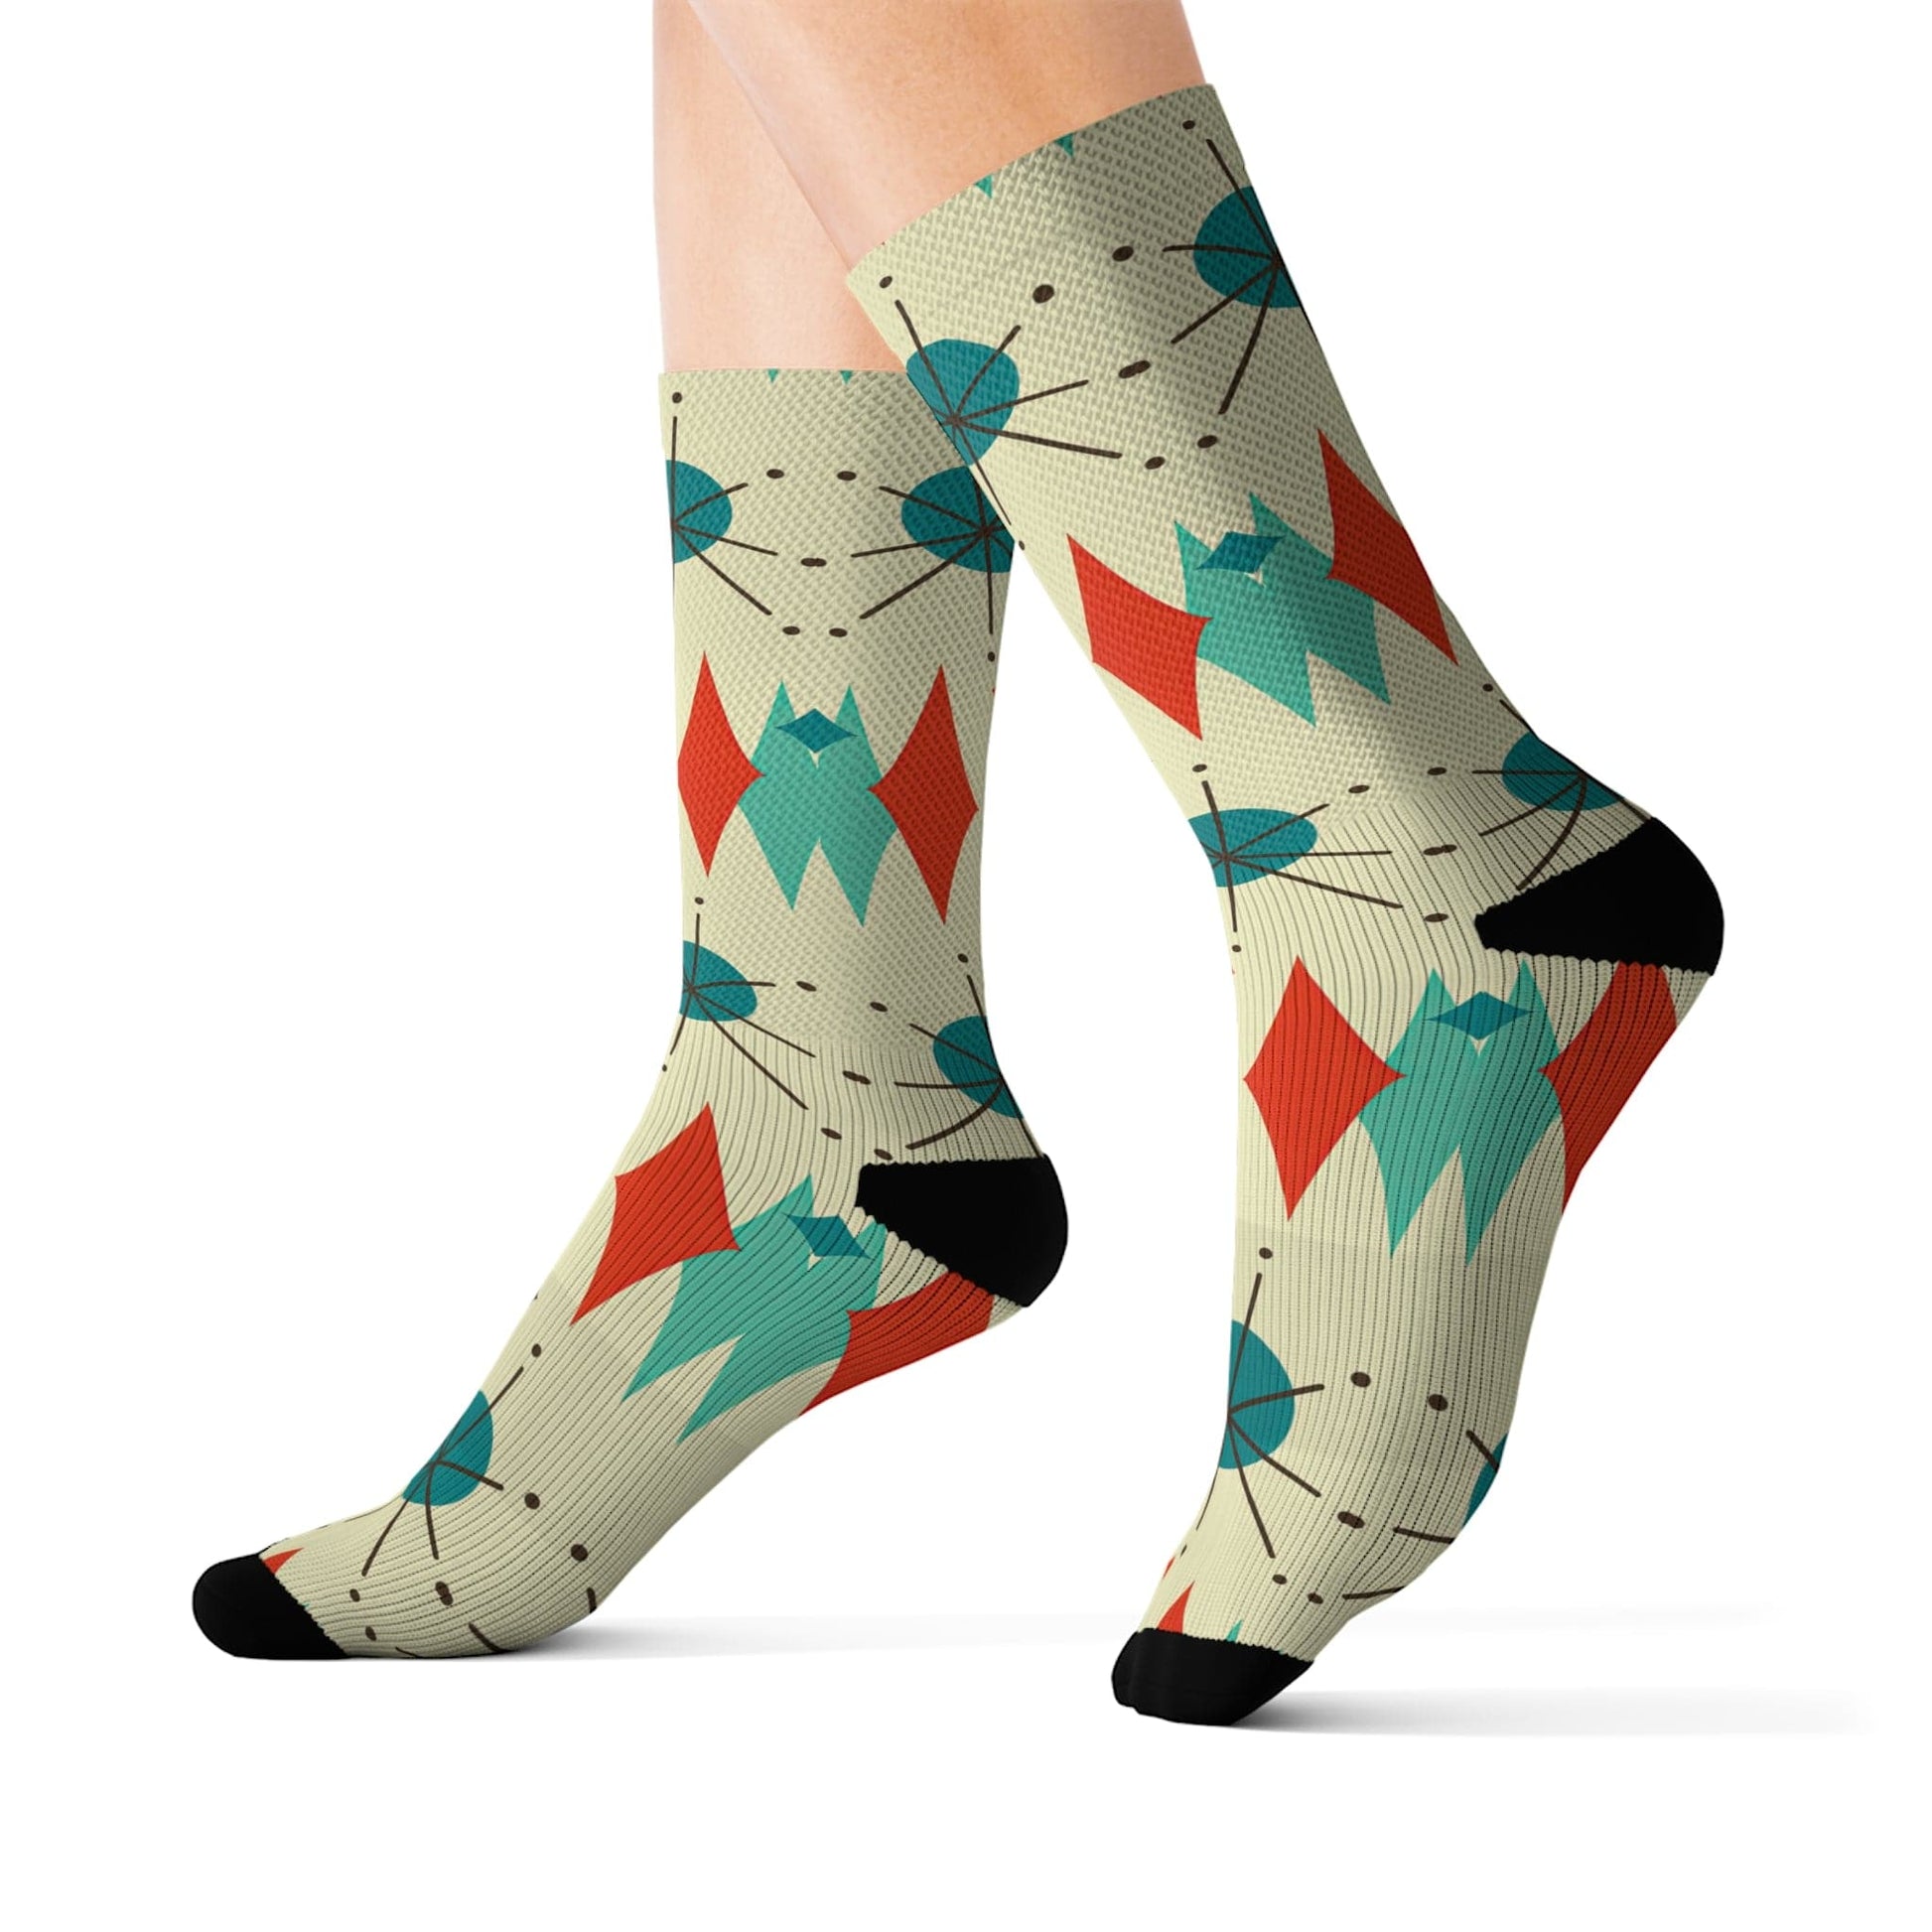 Printify Franciscan Starburst Crew Length Socks, Mid Century Modern Atomic Retro Fleece Lined, Ribbed Tube, Cushioned Bottom Footwear Gifts All Over Prints M 14736643043953930642